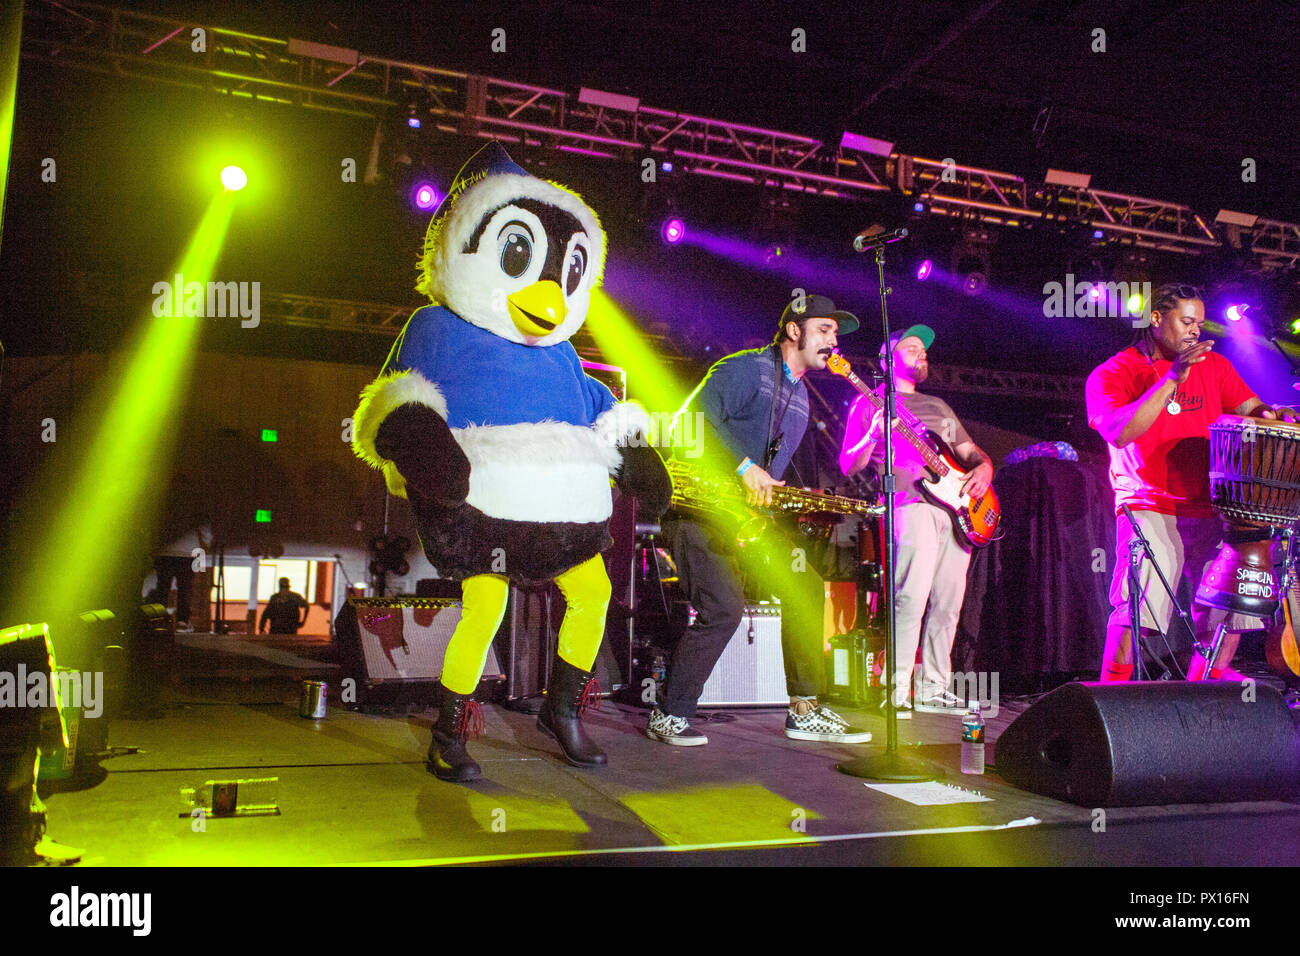 A rock 'n roll singer in a penguin costume is a band mascot during a community festival concert in Costa Mesa, CA. Stock Photo